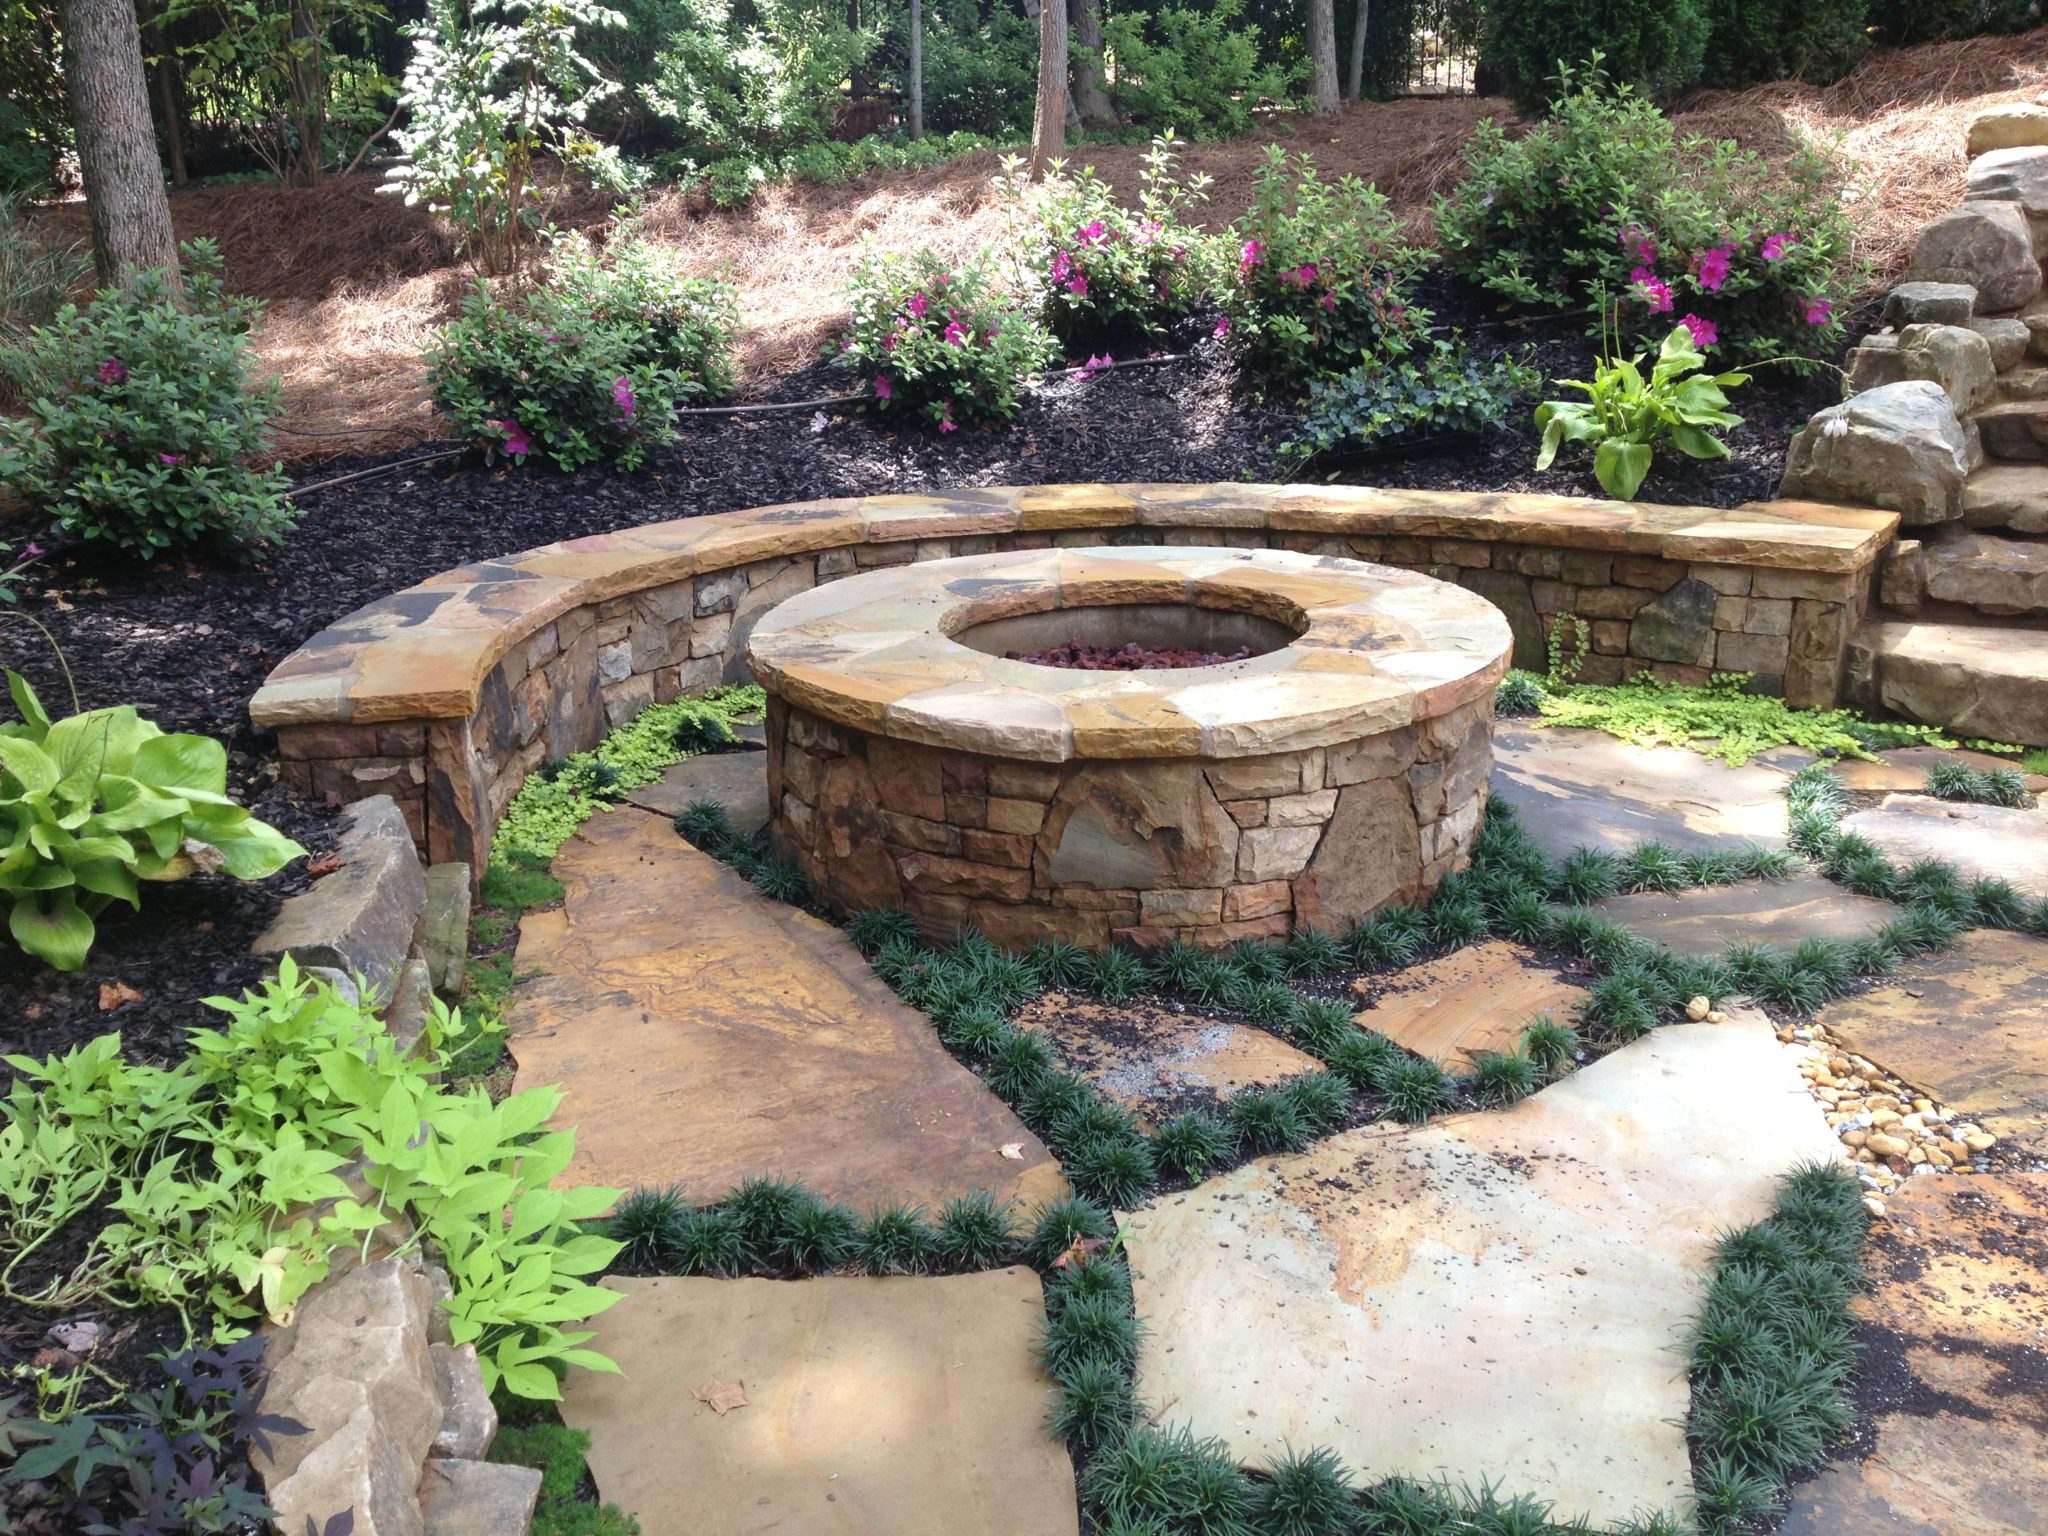 A cozy fire pit surrounded by a stone bench, offering a serene retreat by the poolside.